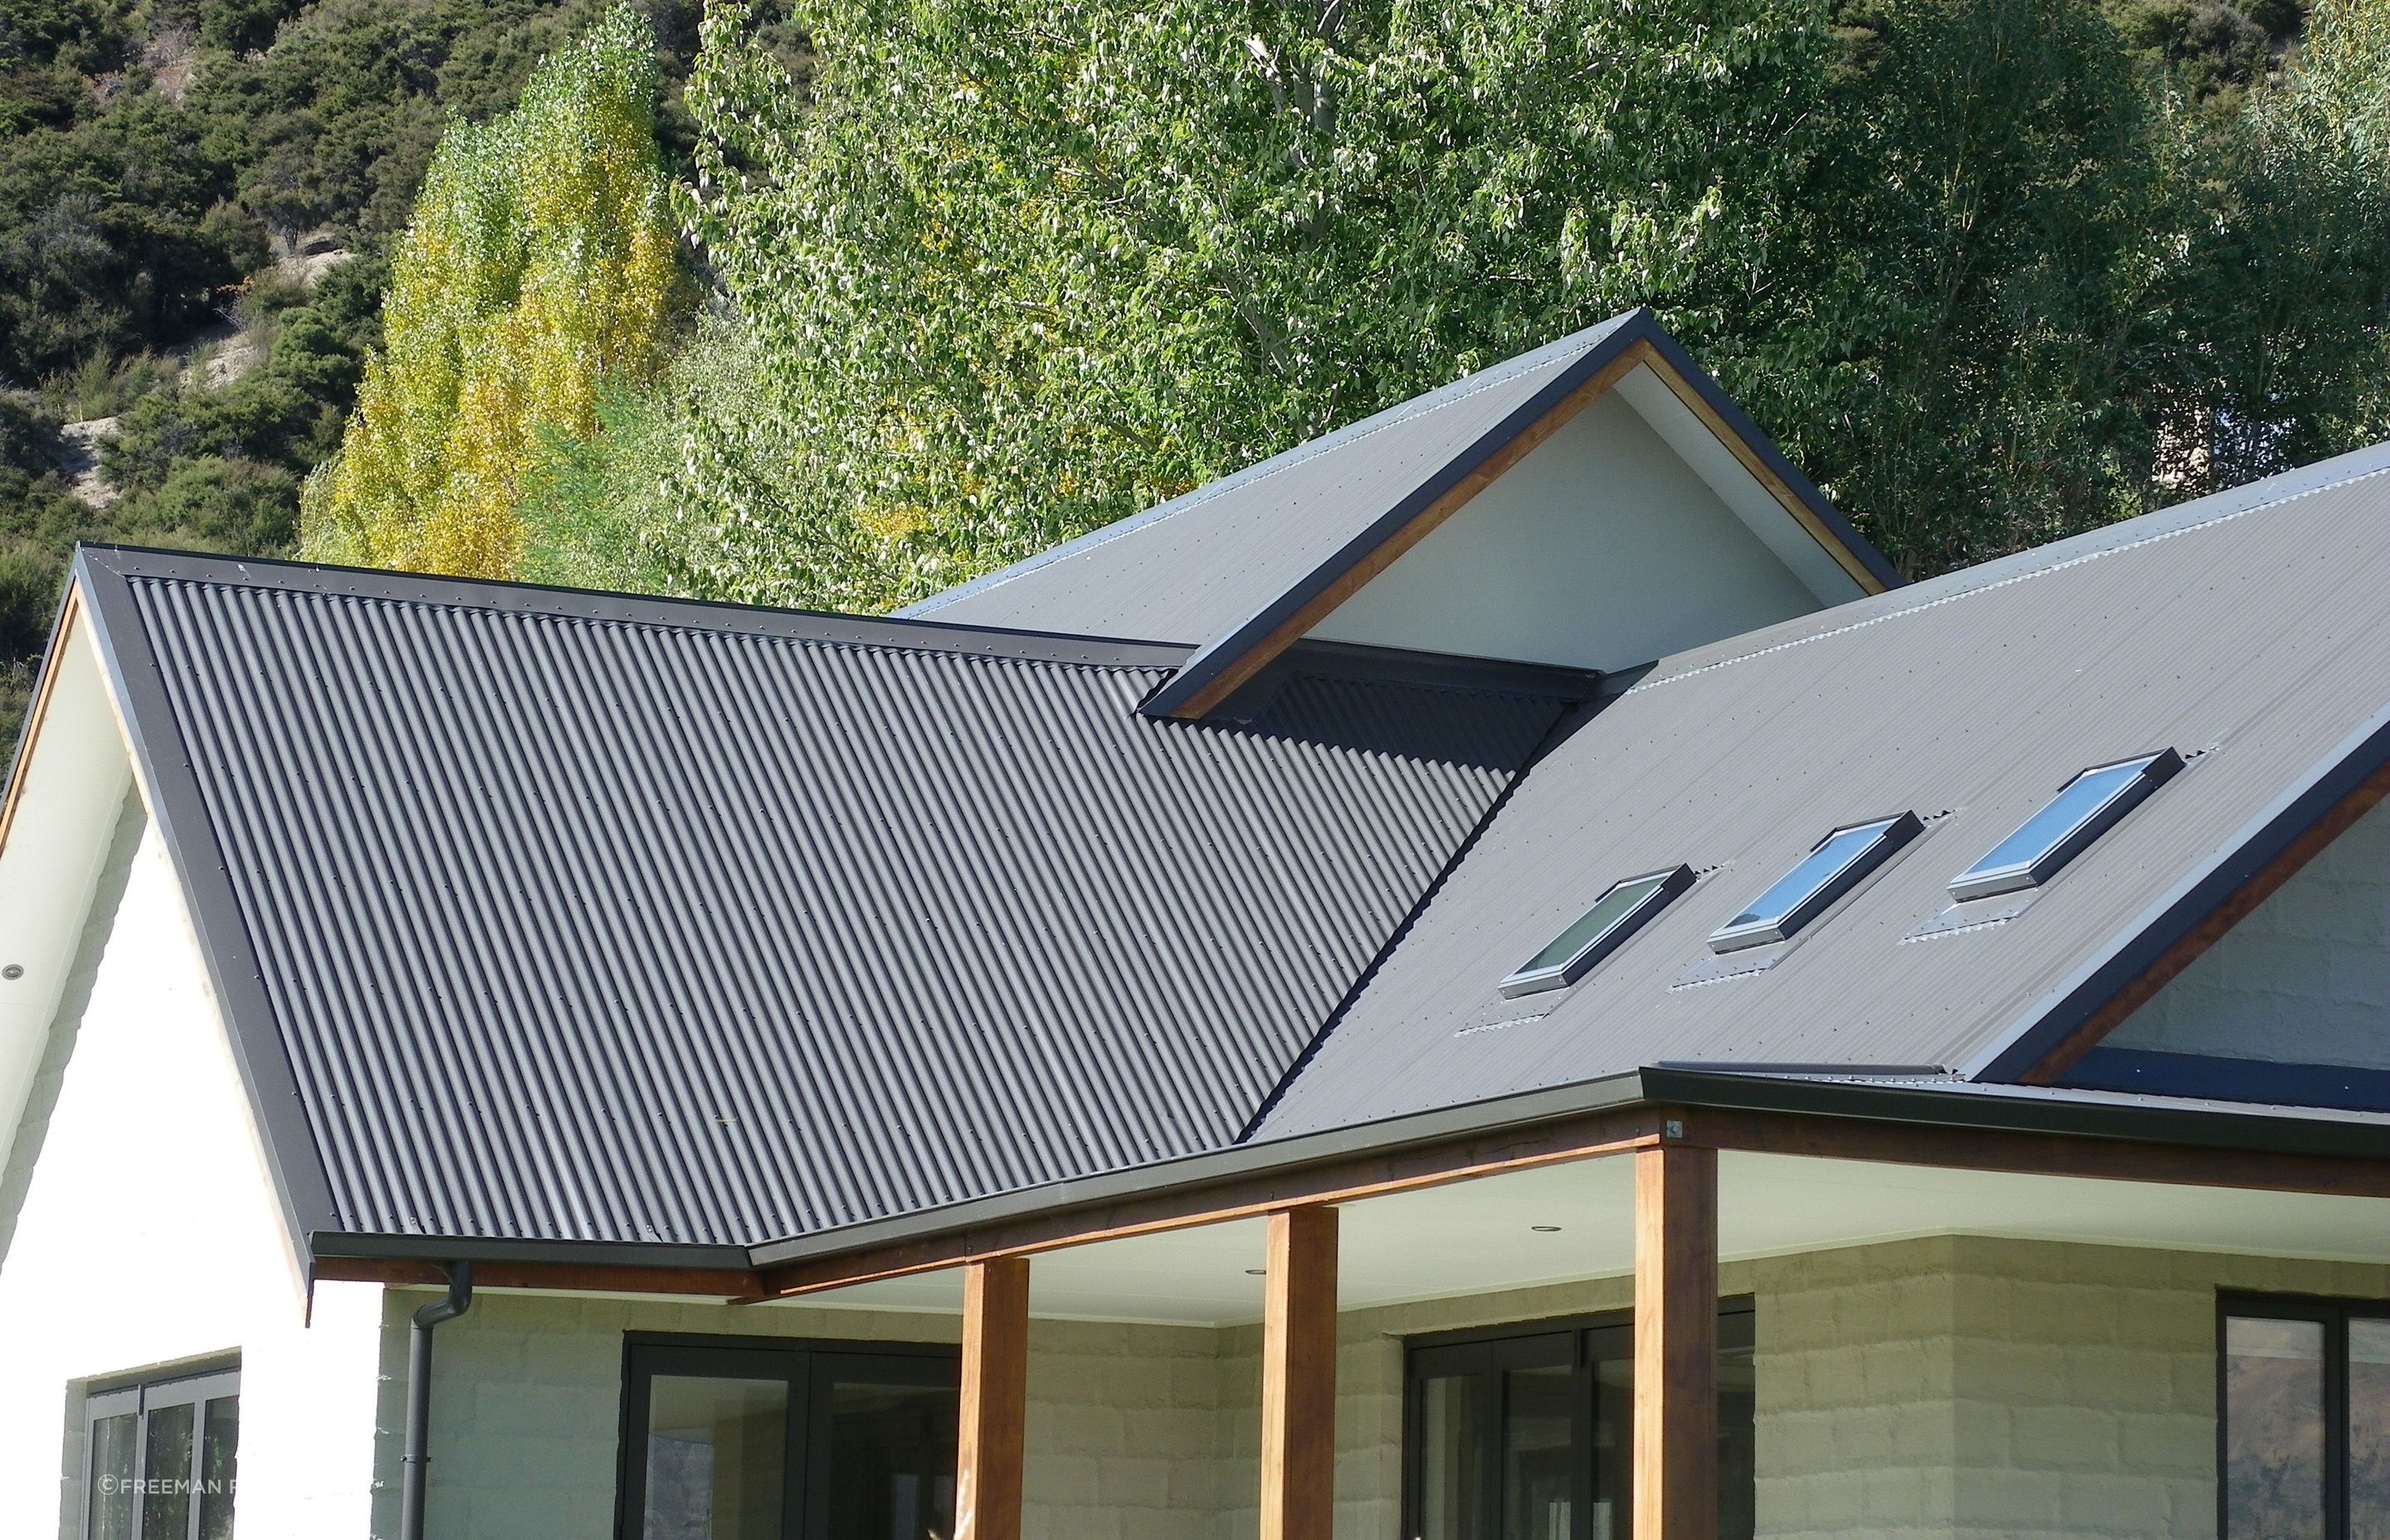 The classic corrugate iron roofing by Freeman Roofing, a Kiwi favourite for more than a century.